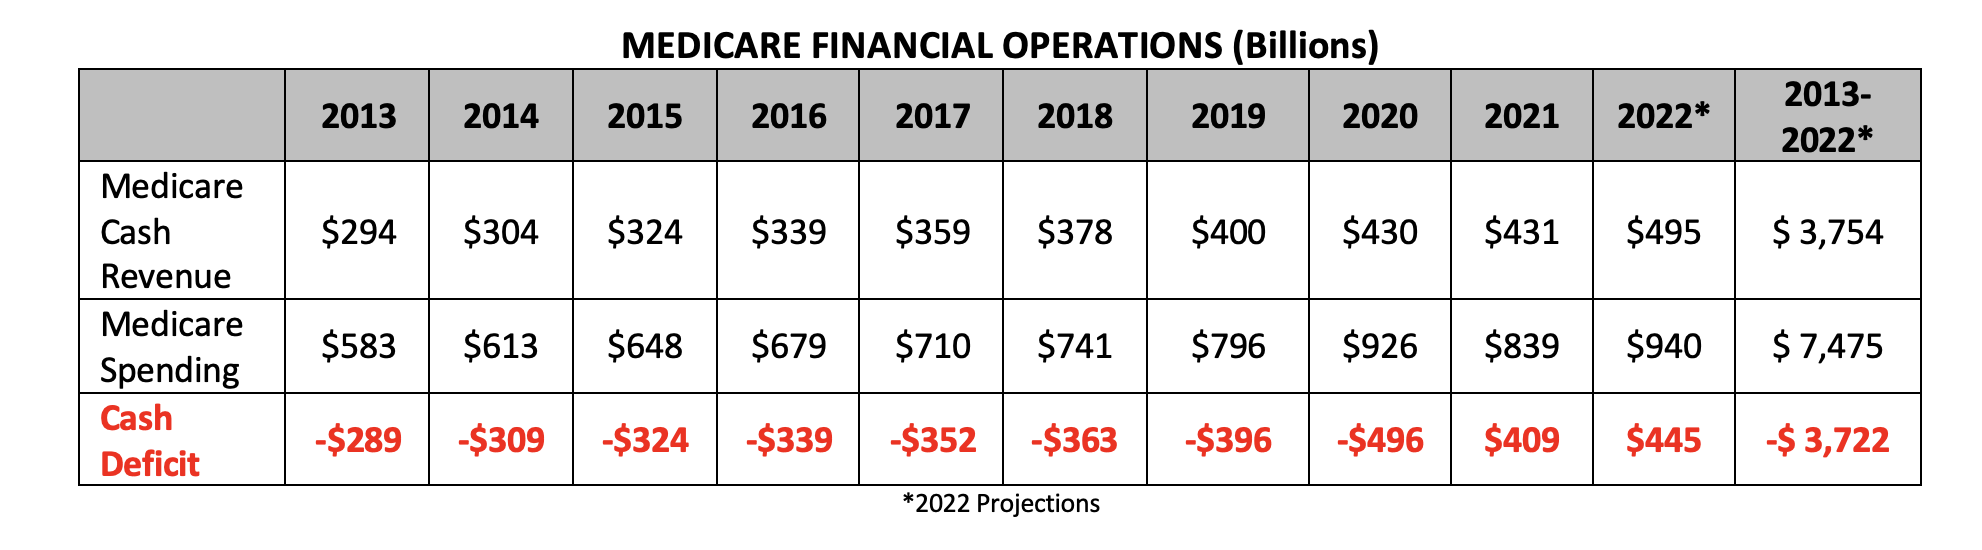 Medicare Financial Operations chart